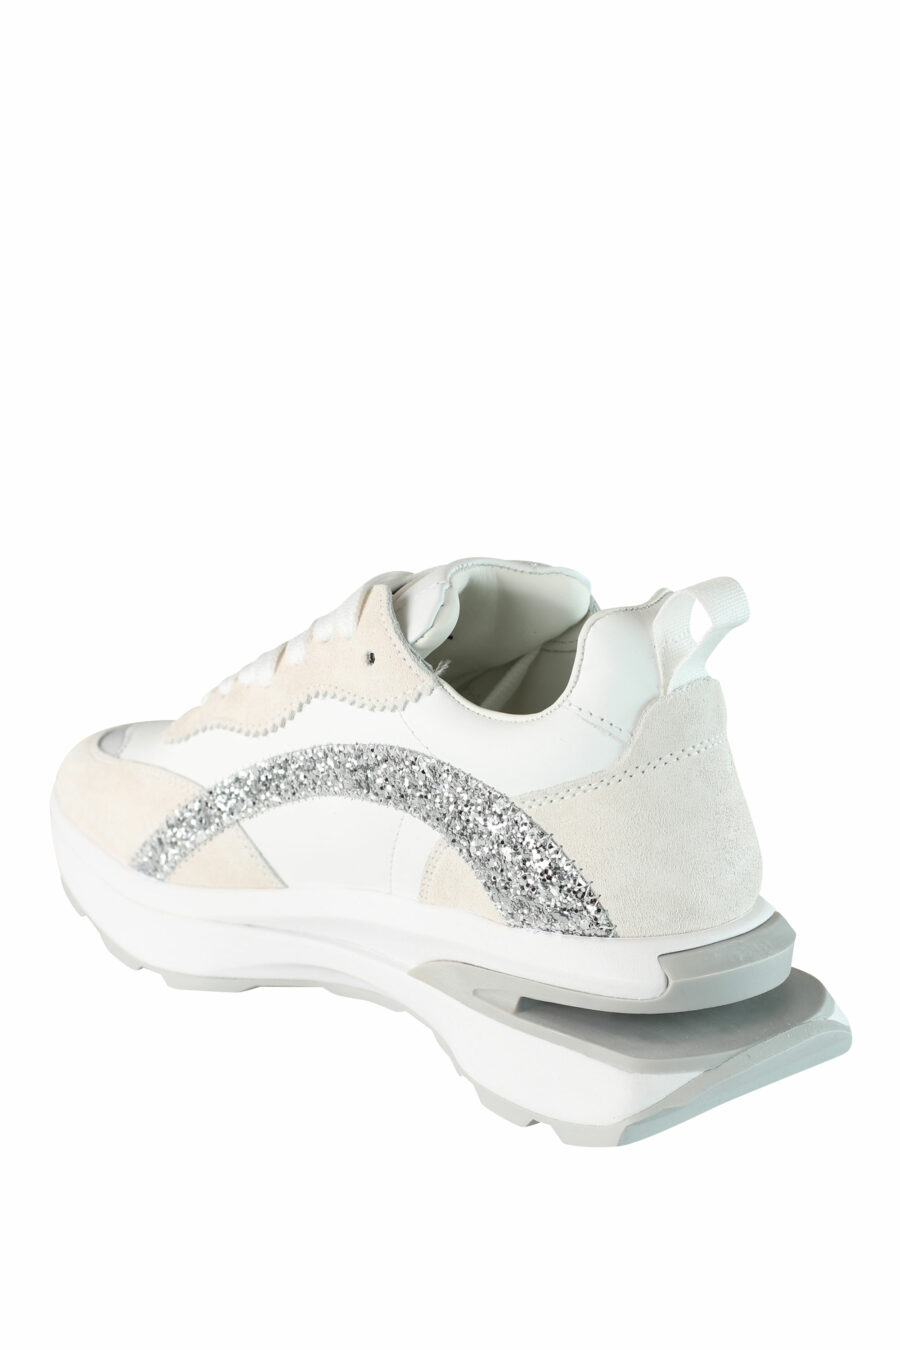 White trainers with beige and glitter detail - IMG 1509